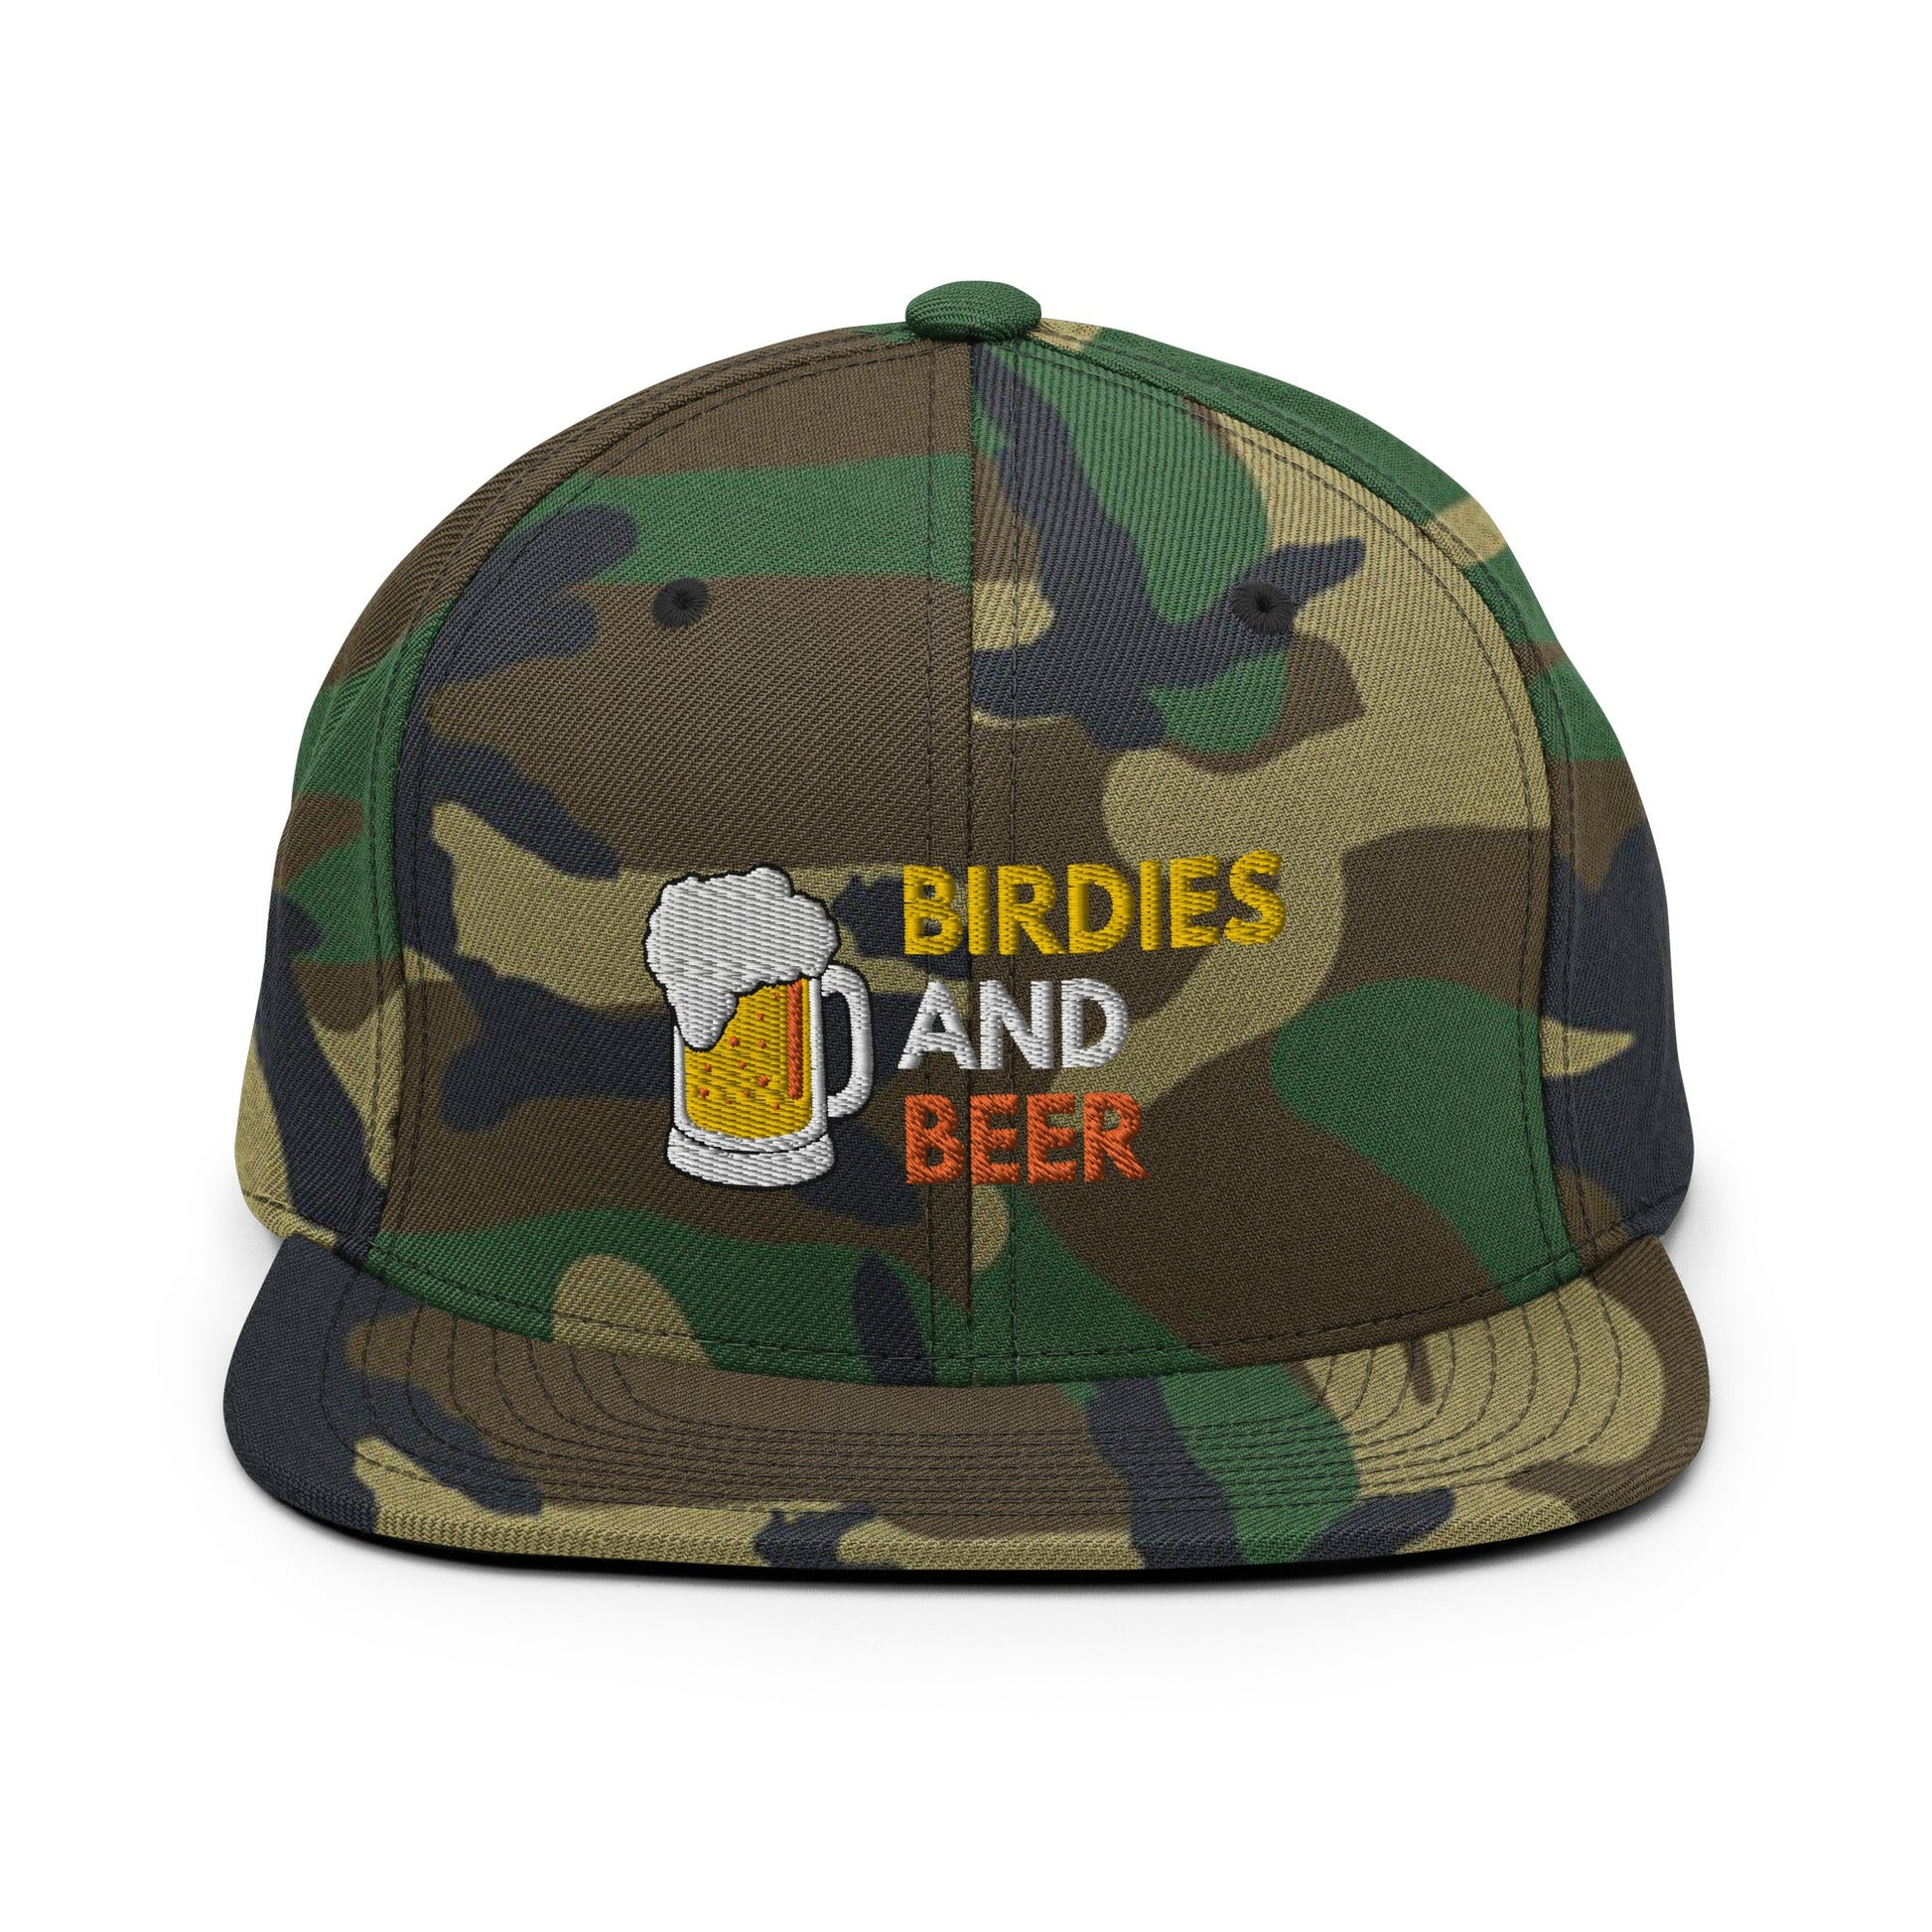 Funny Golfer Gifts  Snapback Hat Green Camo Birdies and Beer Snapback Hat